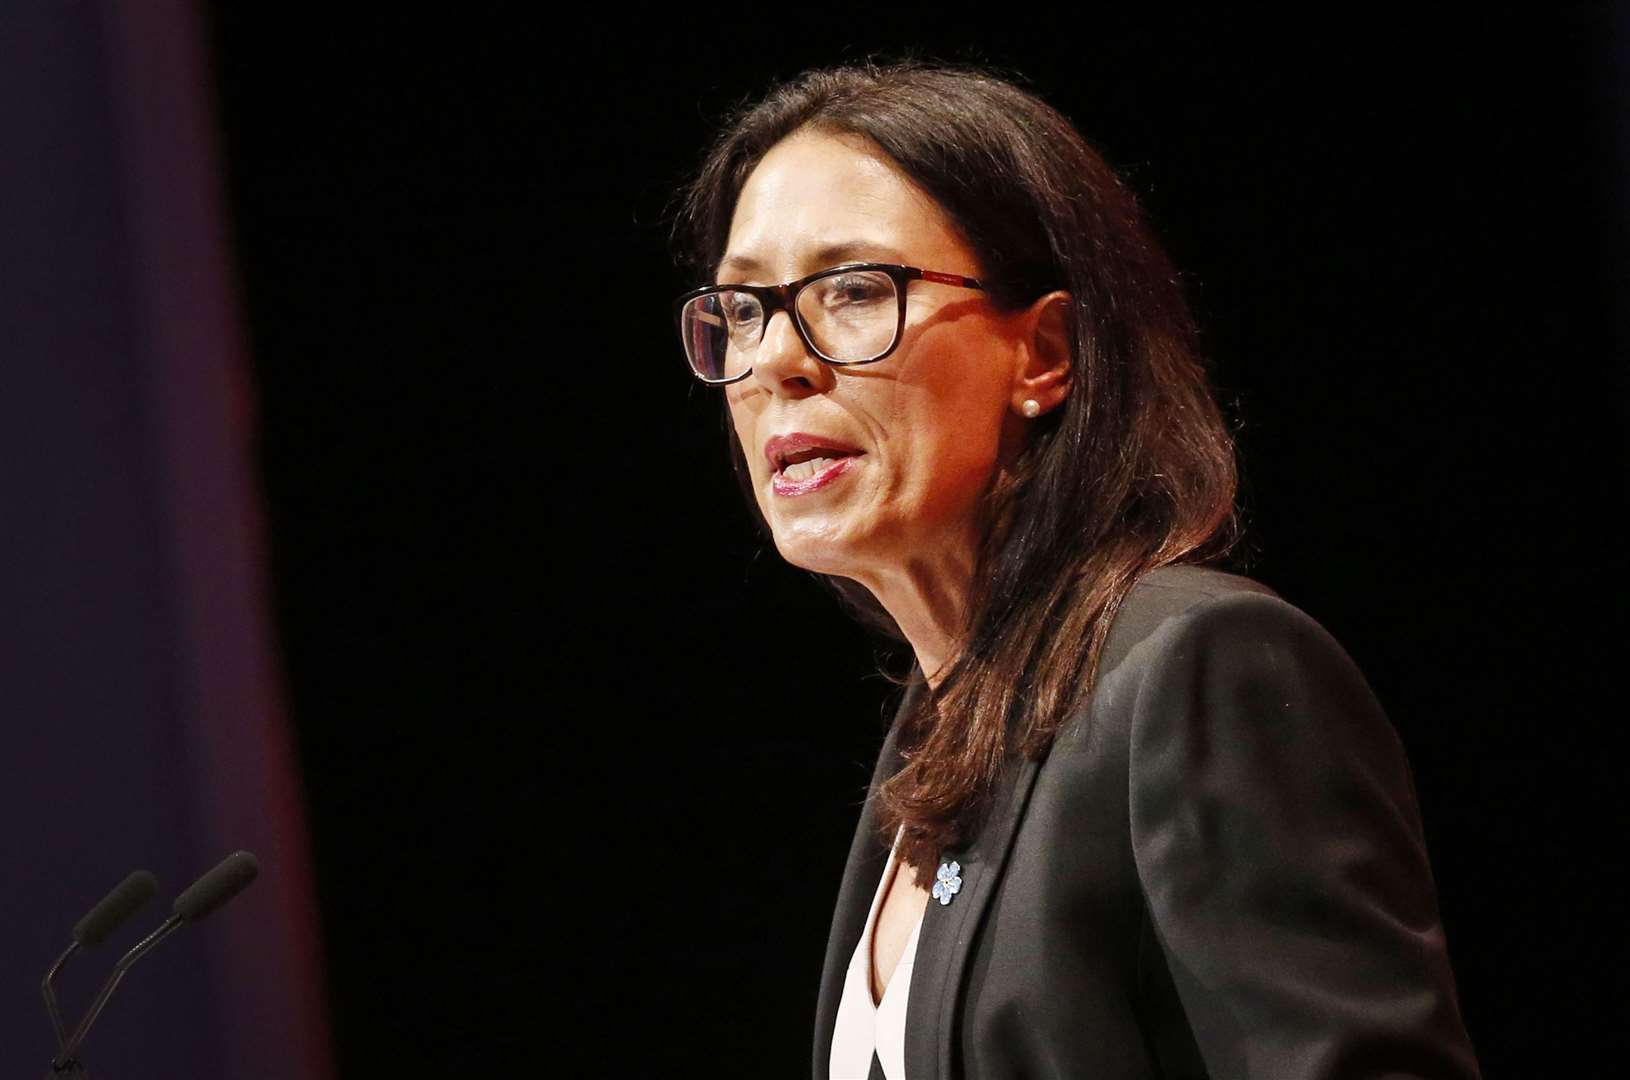 Debbie Abrahams has asked the Prime Minister to support her bill (Danny Lawson/PA)